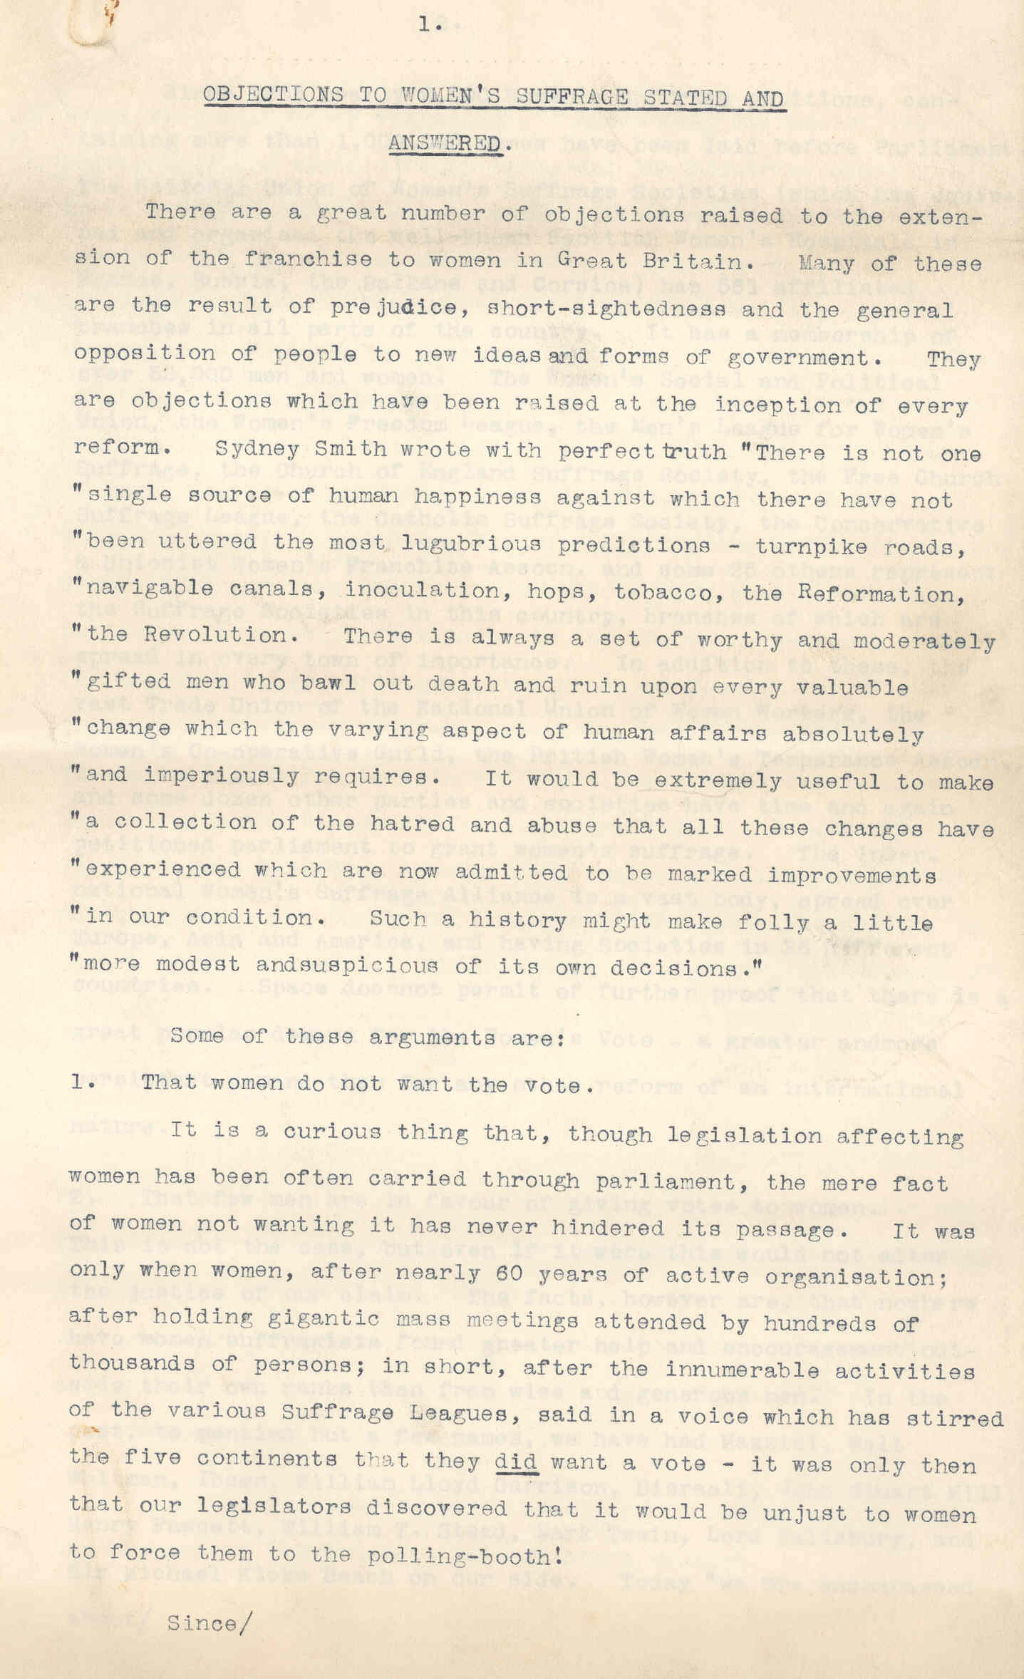 'Objections to women's suffrage stated and answered', 1916